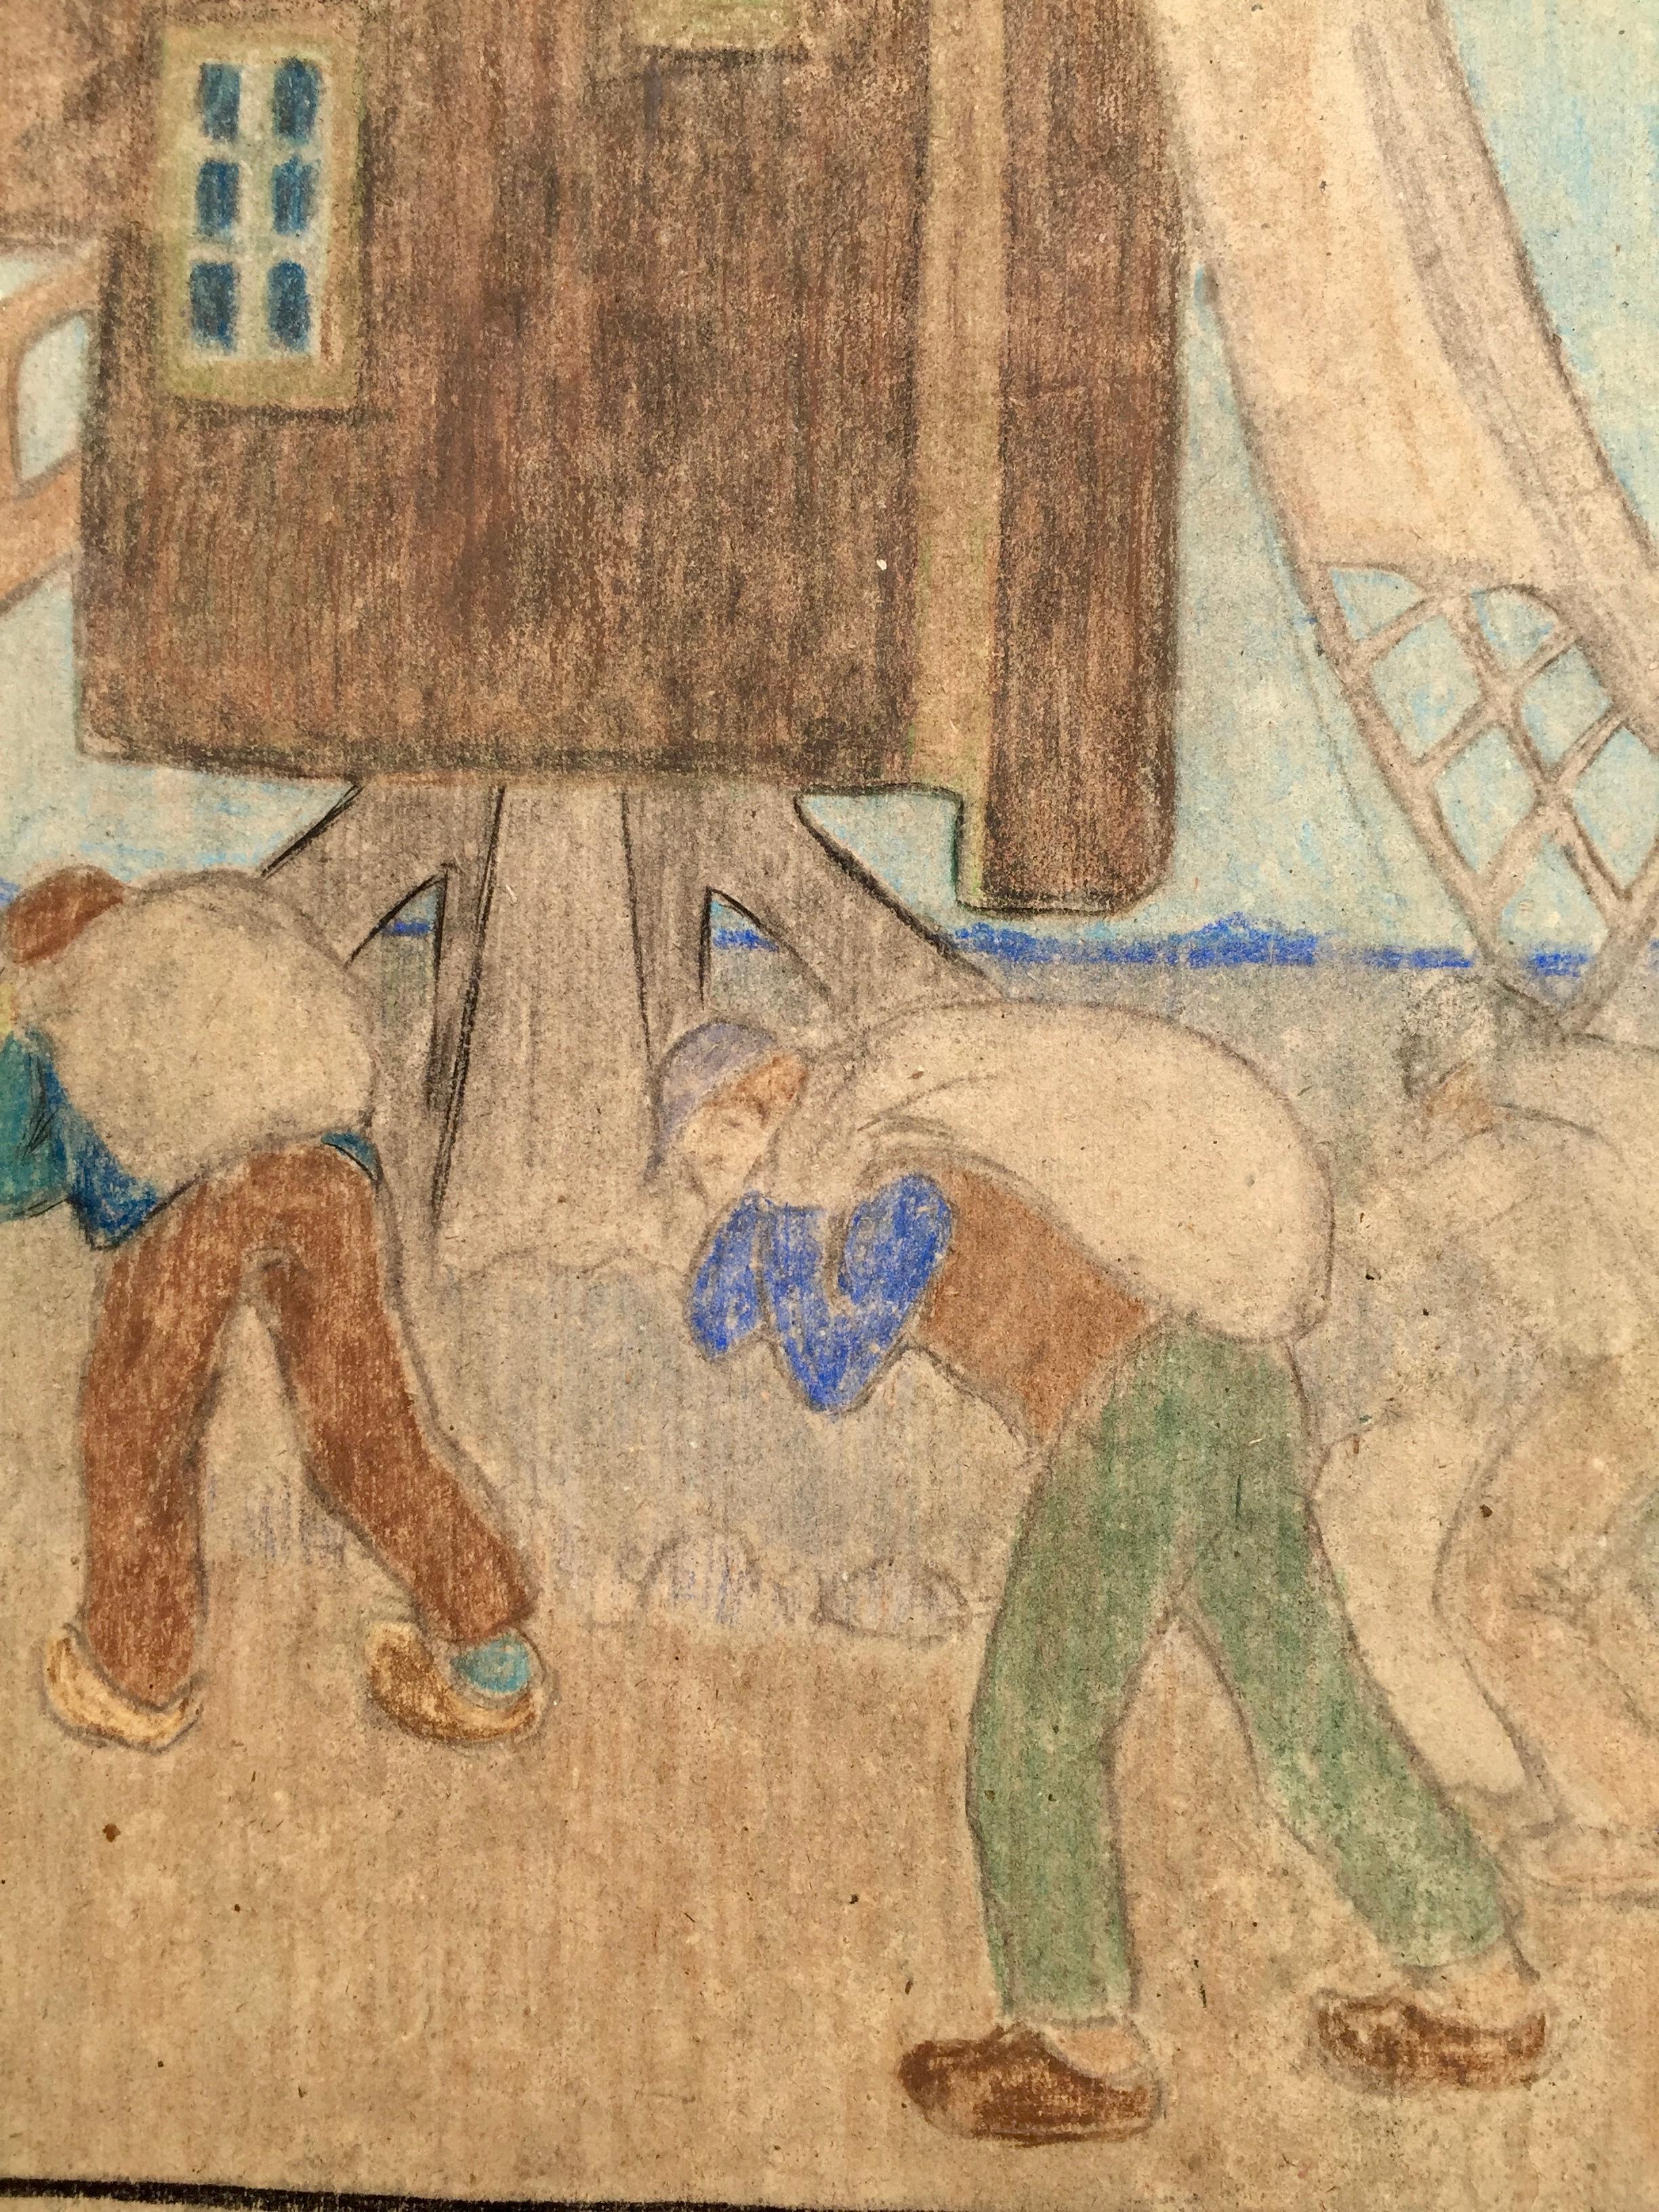 B.J.O. NORDFELDT (Swedish/American 1878 – 1955)

          (WINDMILL AND WORKERS). c.1900. Color pastel on colored paper,  
          unsigned. 22 ¼ x 15”. Sheet: 24 ½ x 18 ¼”.  In 1900 Nordfeldt studied in  
          Paris and then headed to